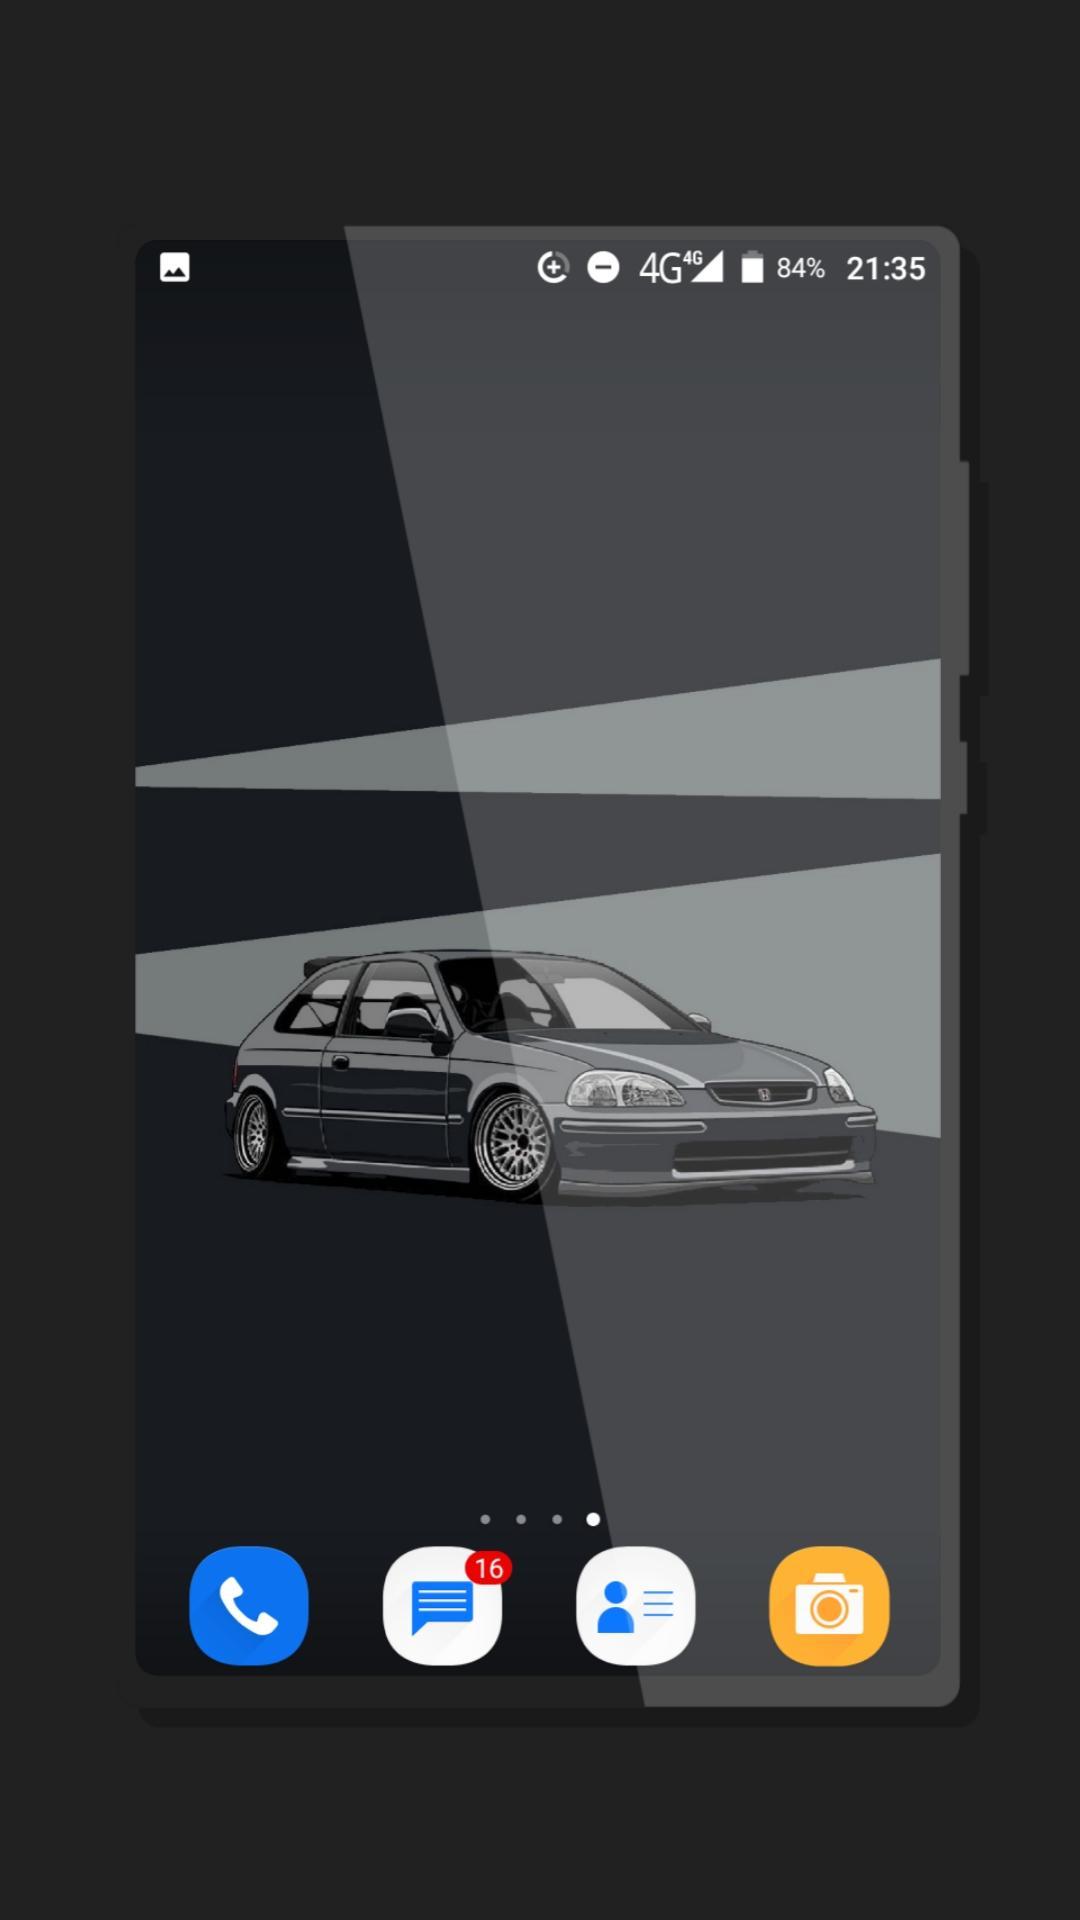 JDM Cars Wallpaper for Android APK Download